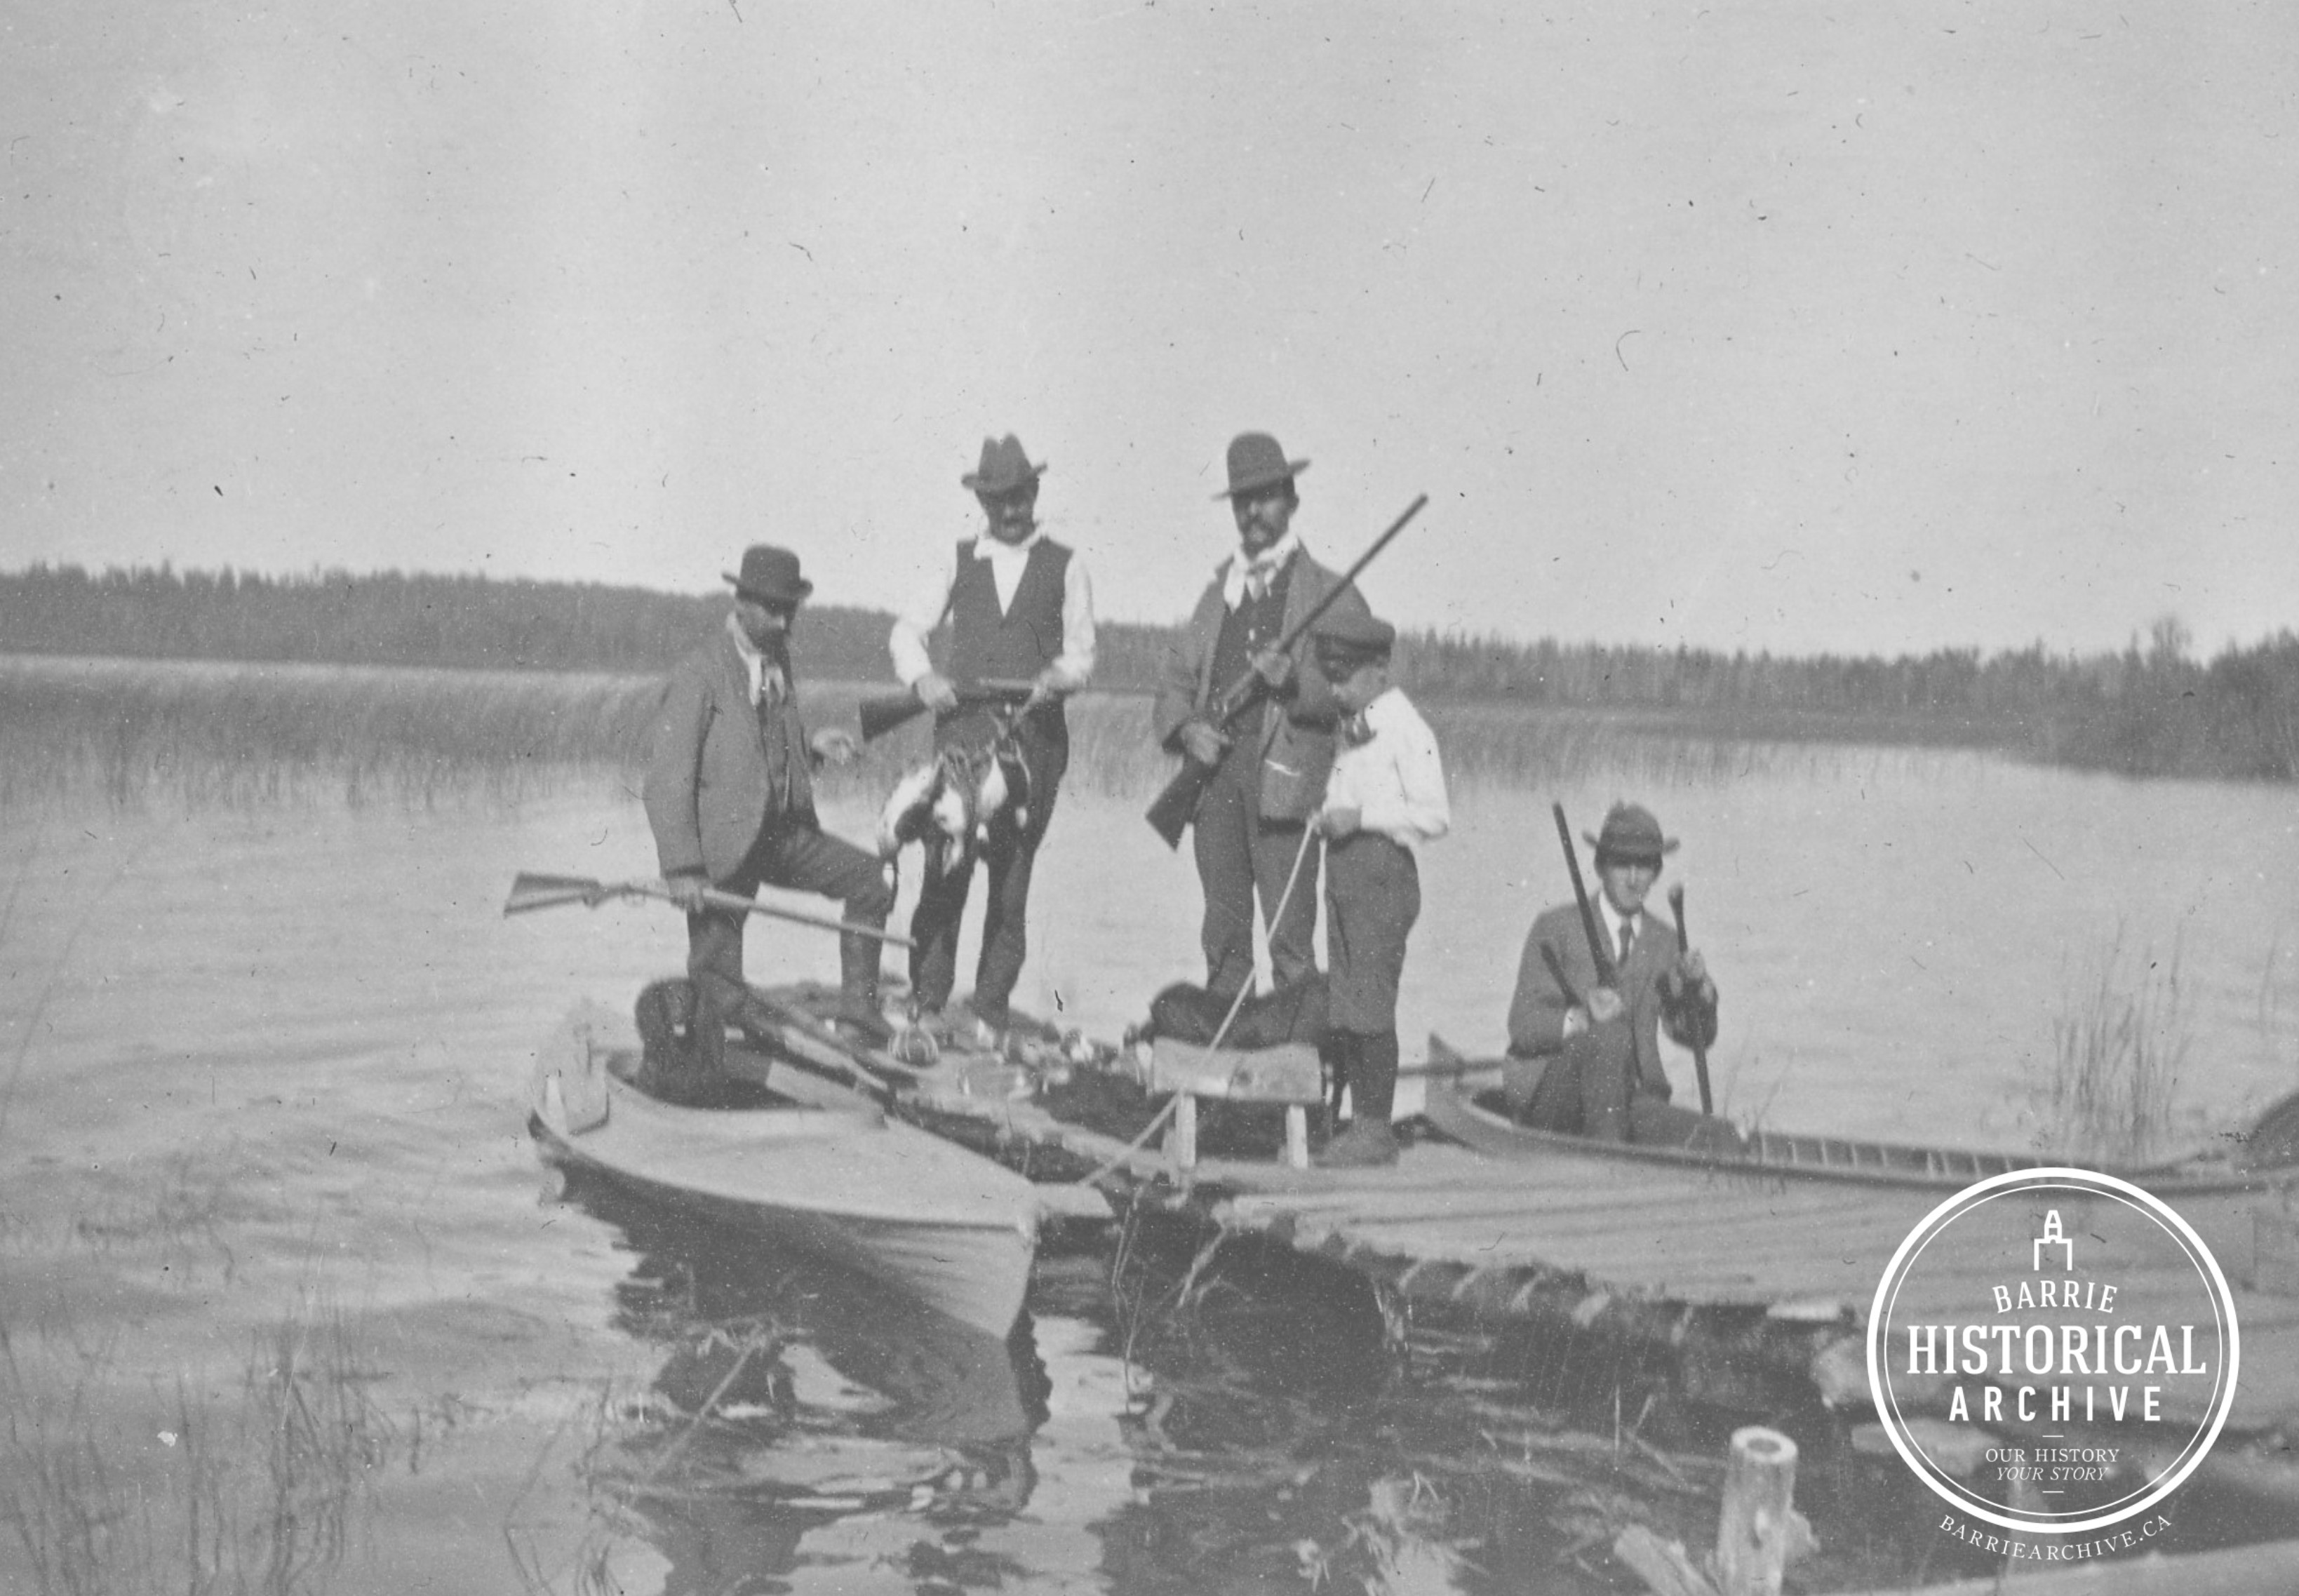 THEN AND NOW: Little Lake always a big attraction - Barrie News